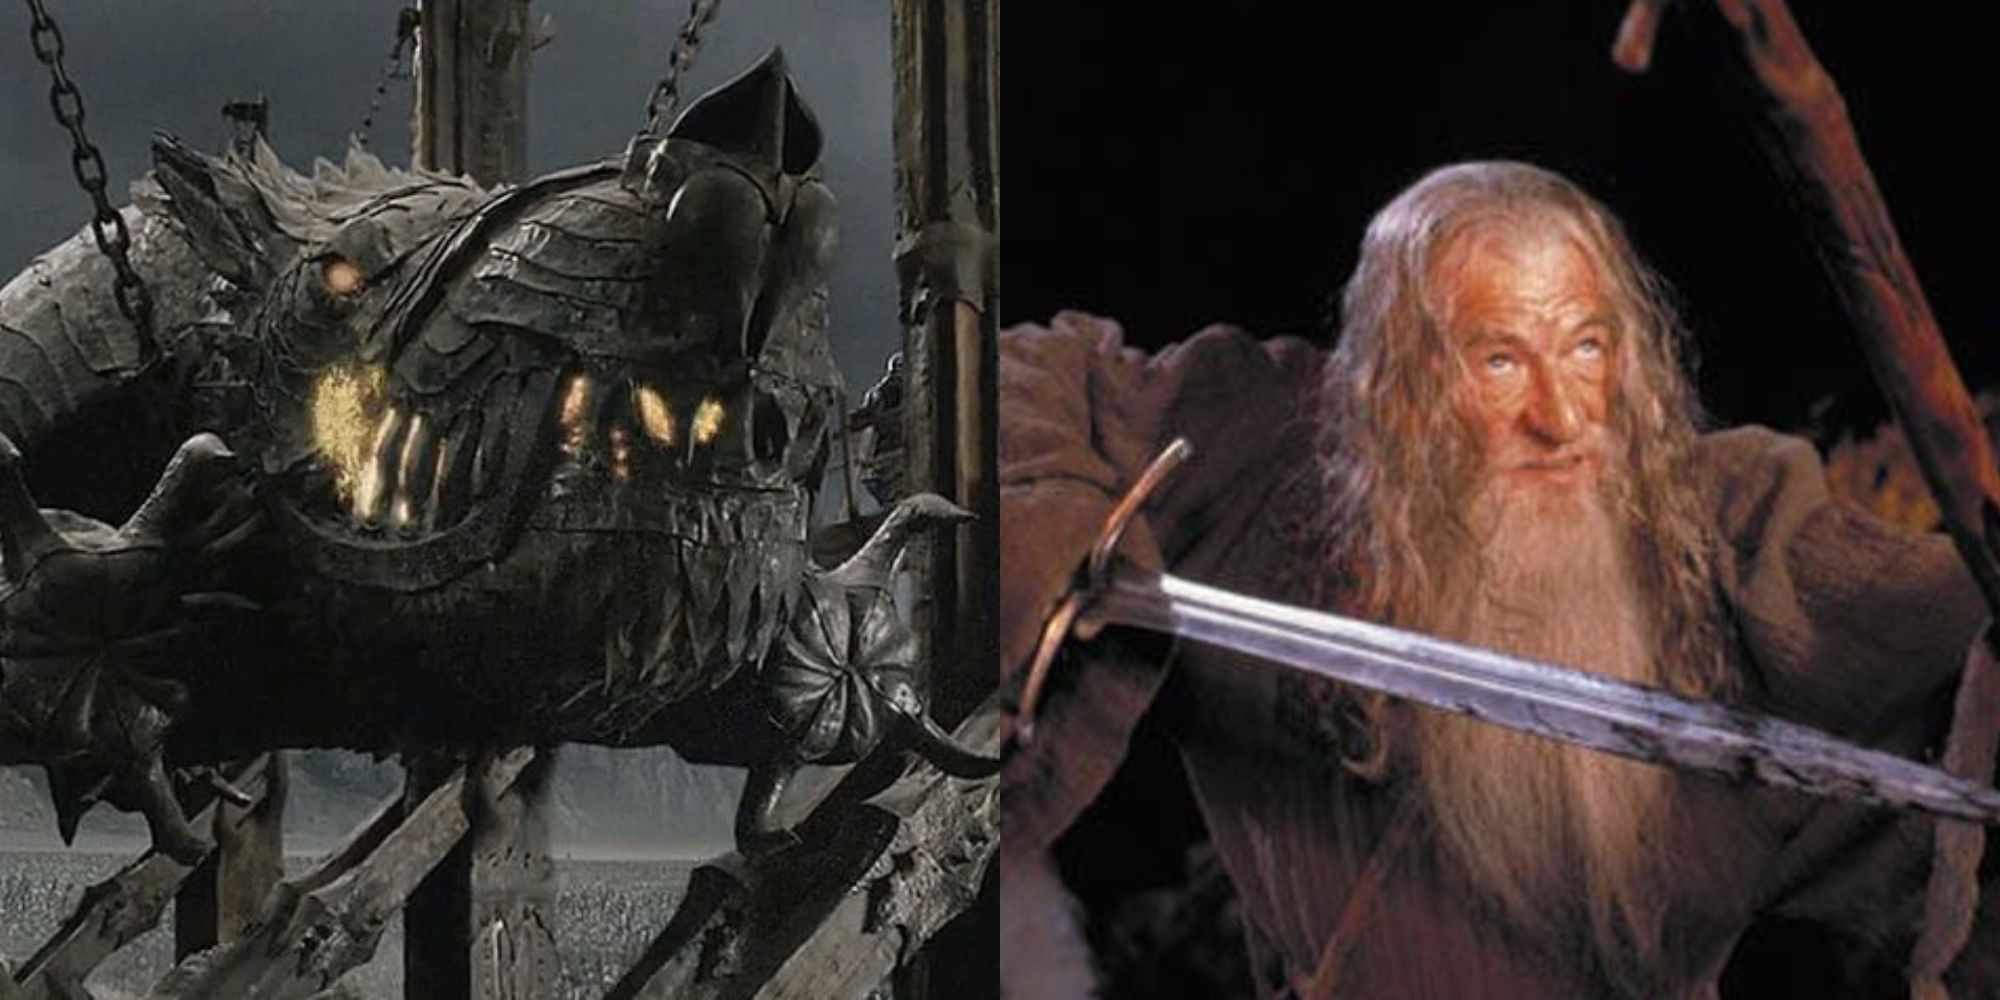 Grond and Gandalf collage The Lord of the Rings